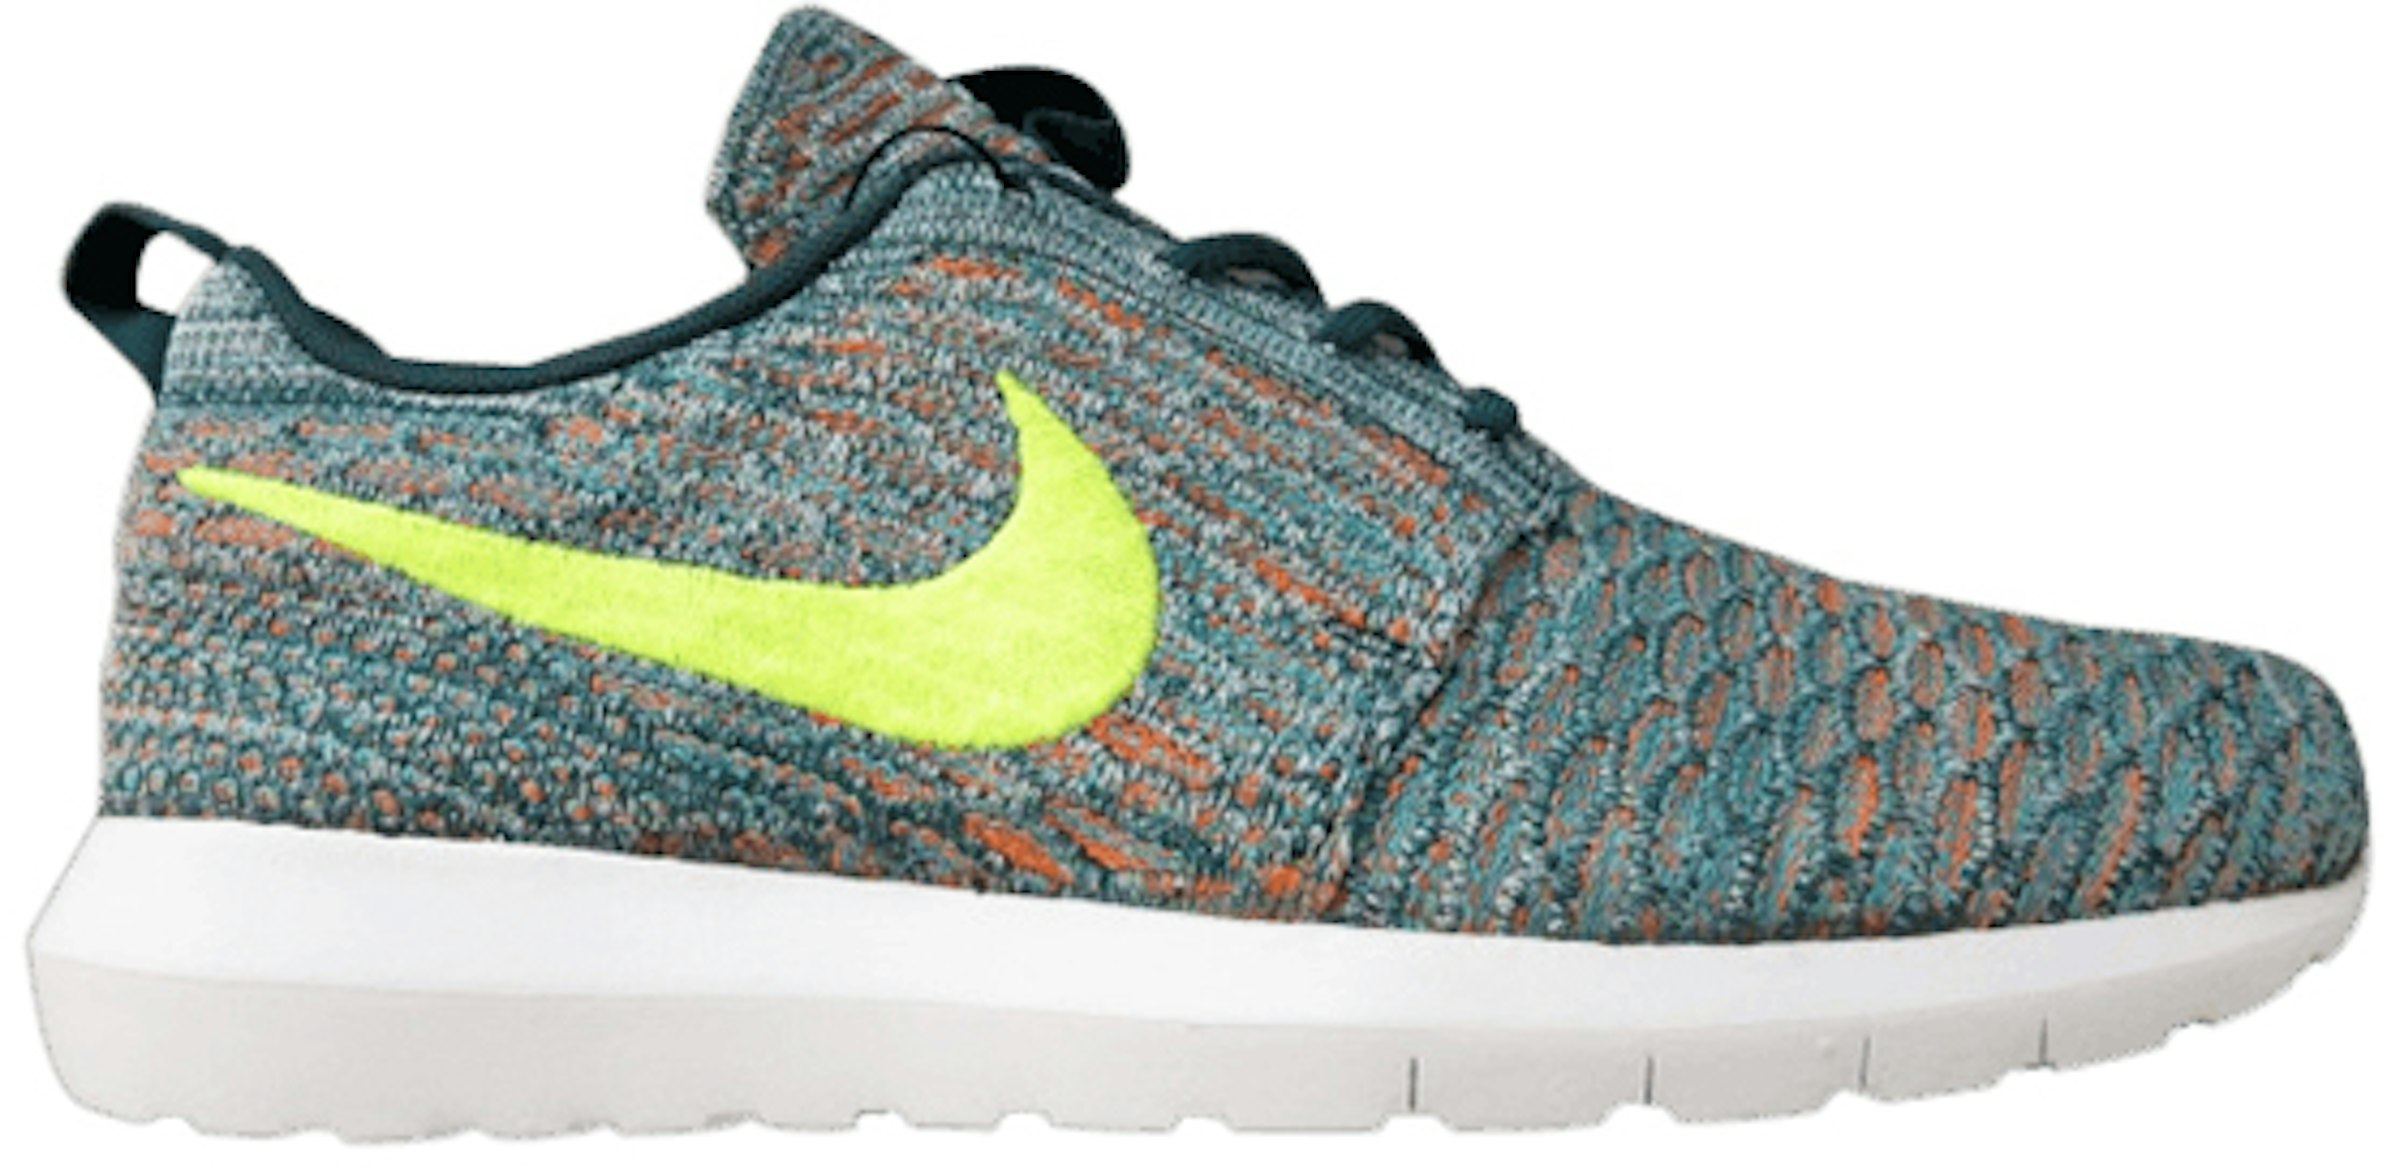 Flyknit Mineral Teal - 677243-300 -